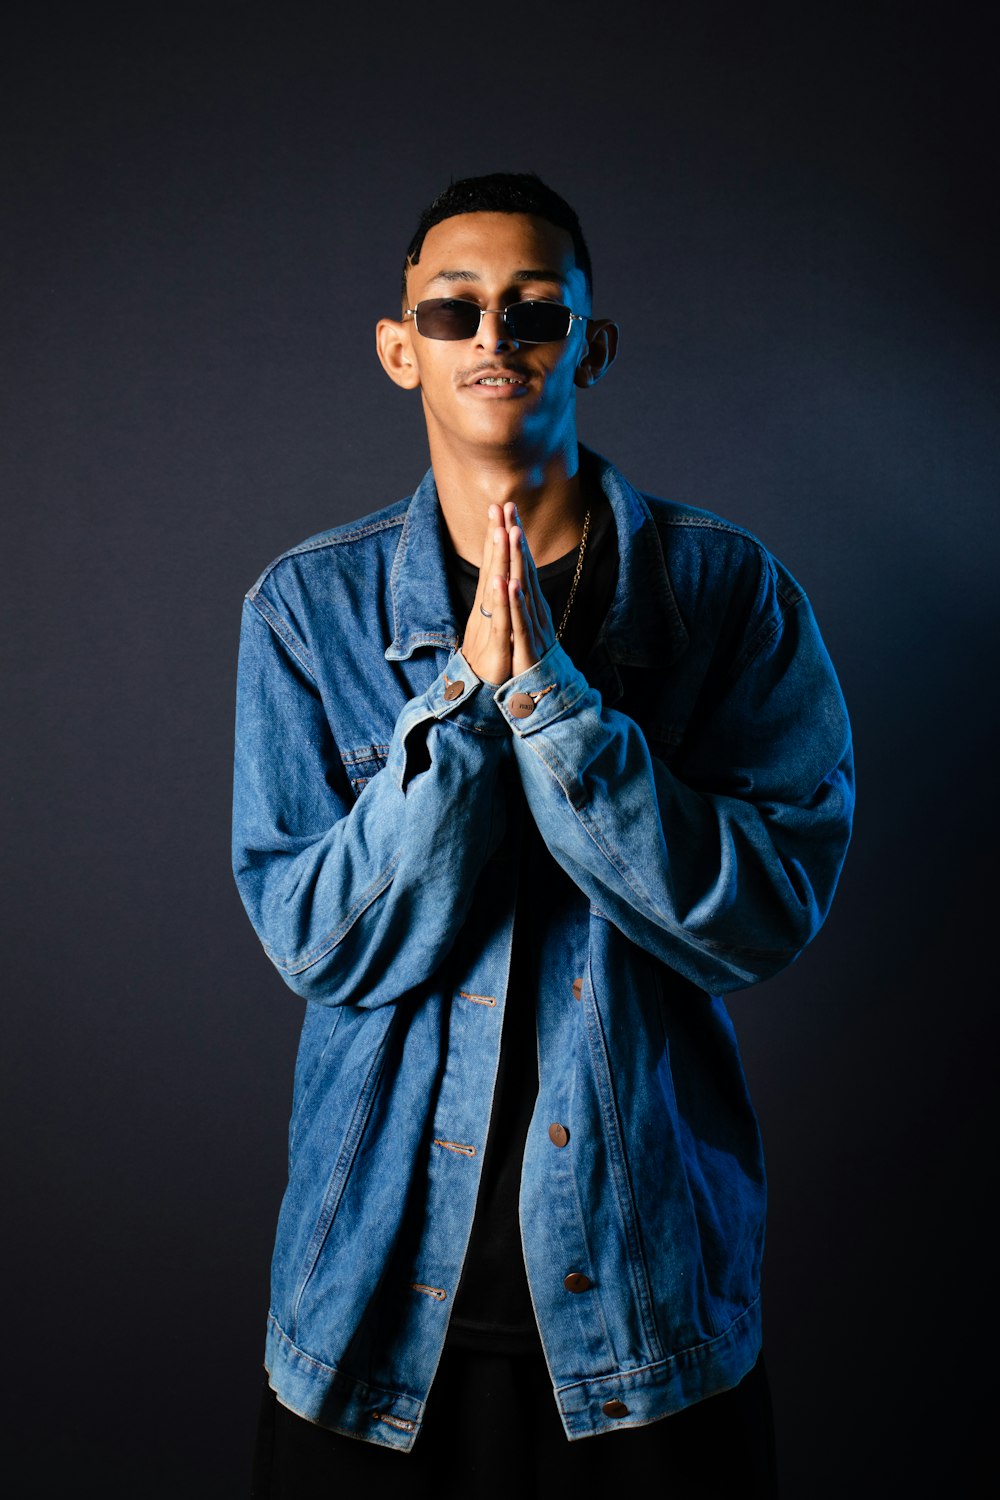 a man in a denim jacket and sunglasses standing in front of a black background